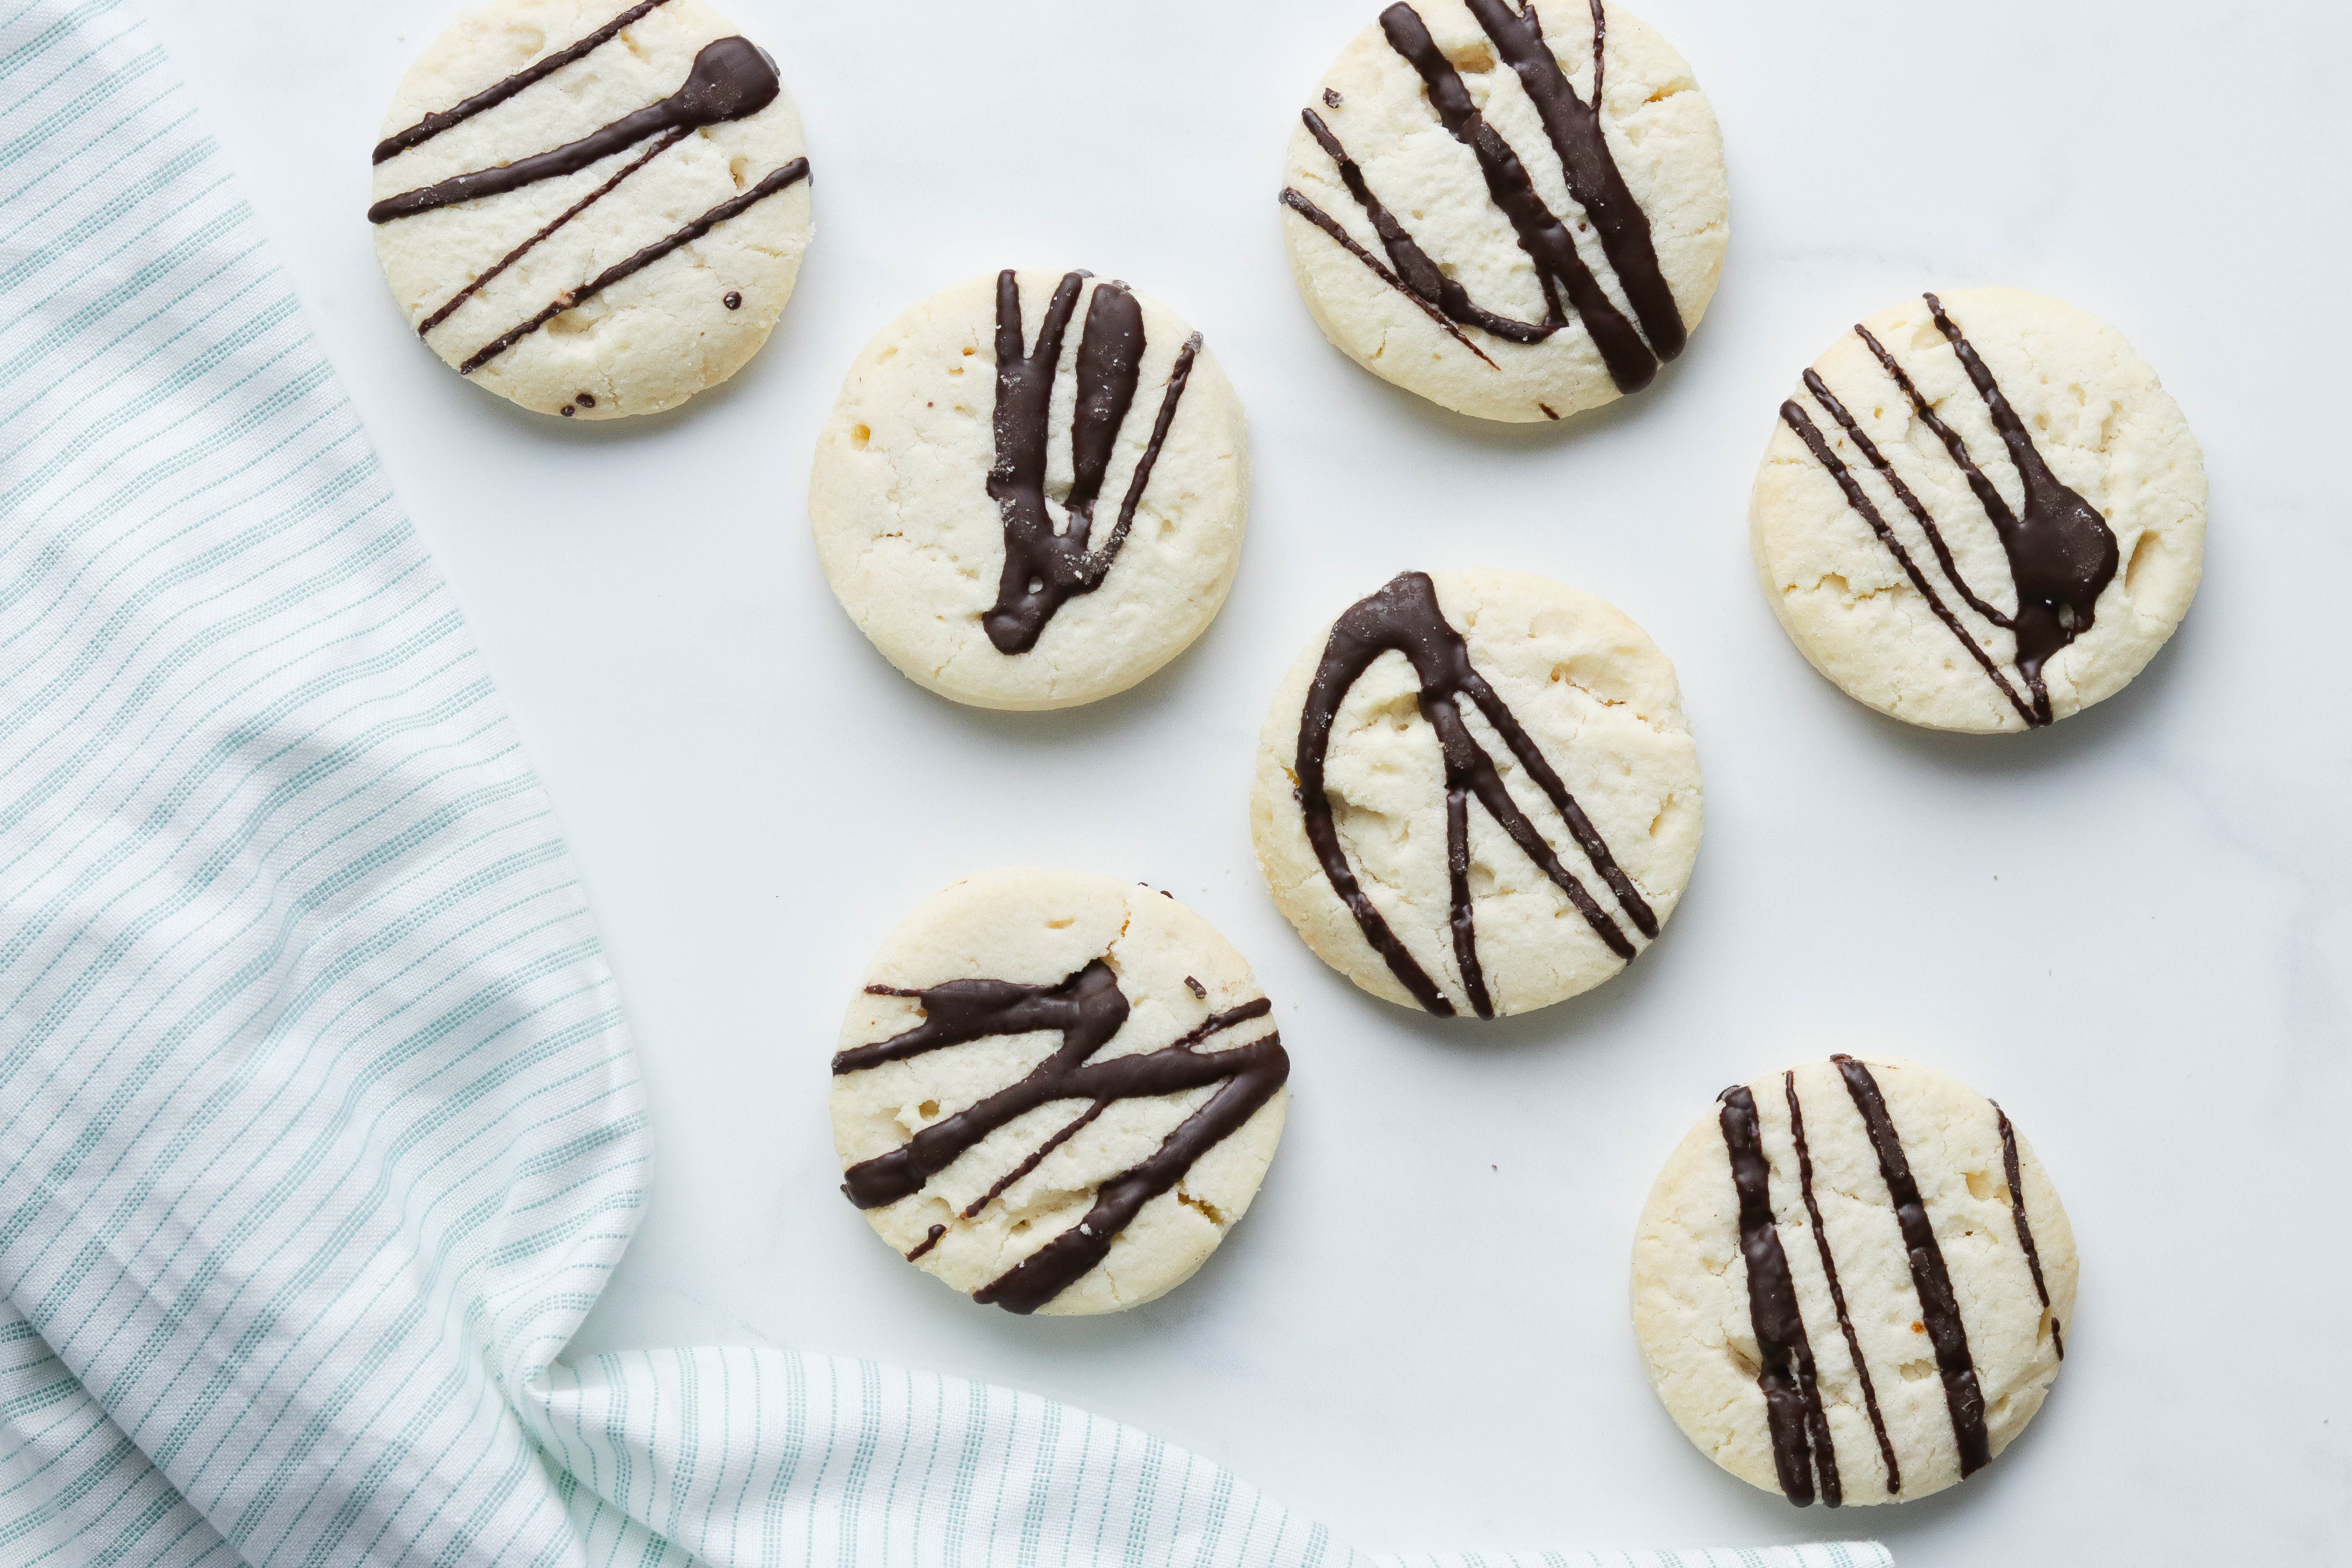 Sugar Free Cookies {Vegan + Gluten Free} || Soft and delicious gluten free and vegan sugar cookies with a dark chocolate drizzle. Taking this holiday cookie to a new healthier level. Quick and easy to make. Please the entire family! #sugarcookies #holidaycookies #christmasbaking #glutenfree #vegan || Nikki's Plate